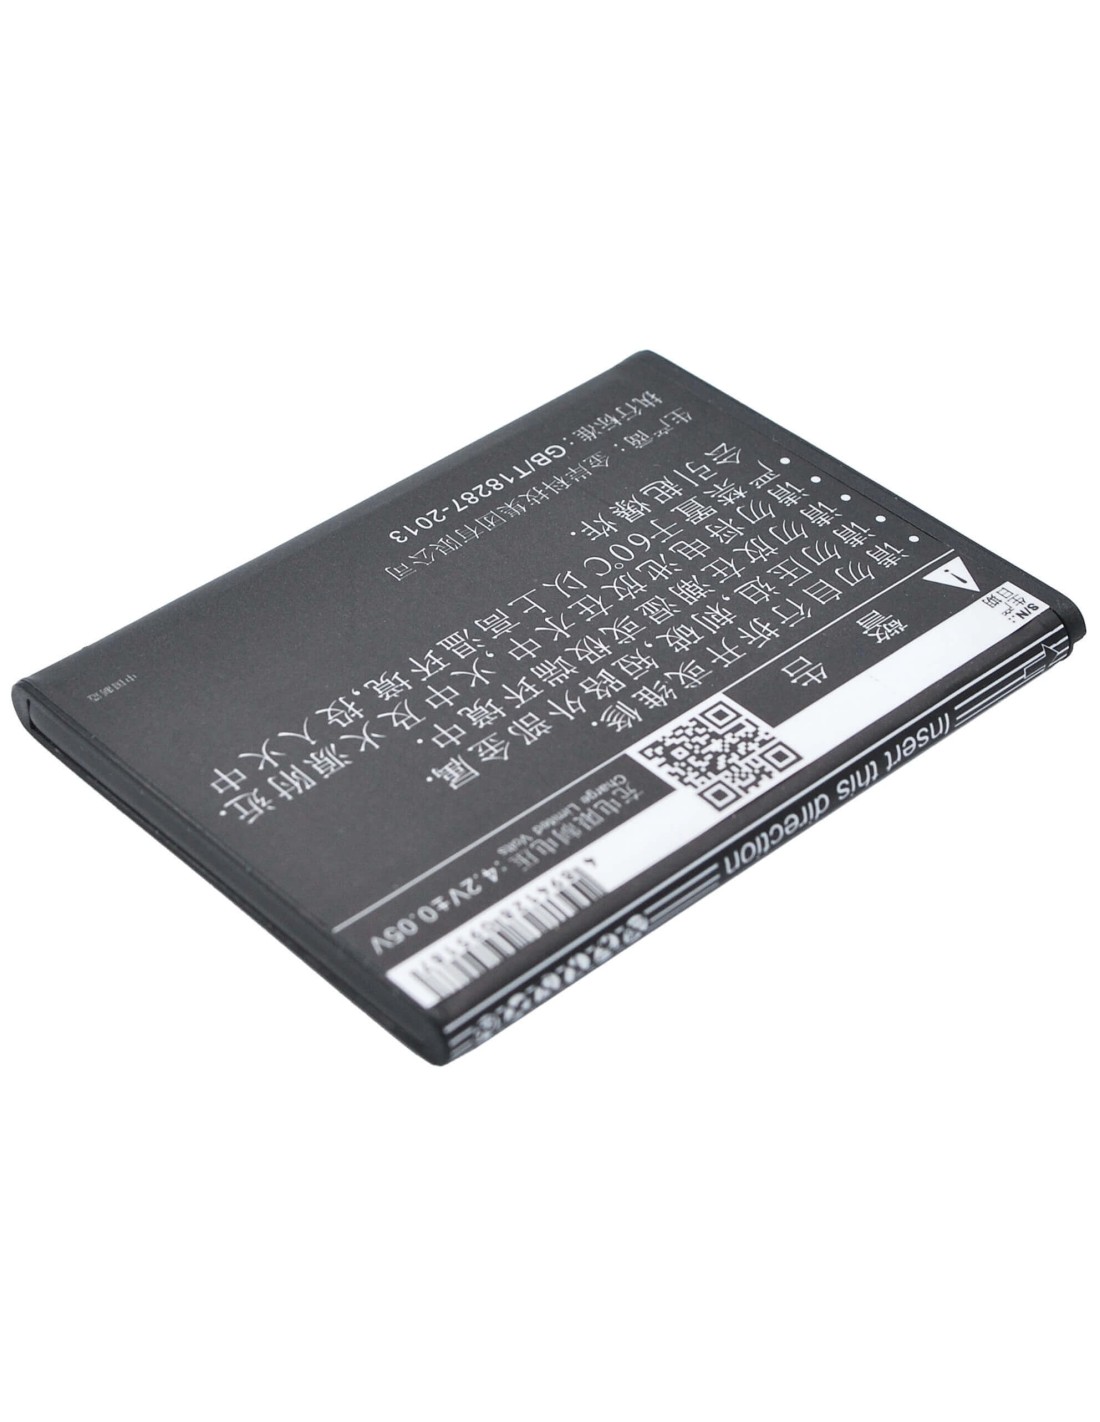 Battery for K-Touch C986T, W68, C960T 3.7V, 1350mAh - 5.00Wh